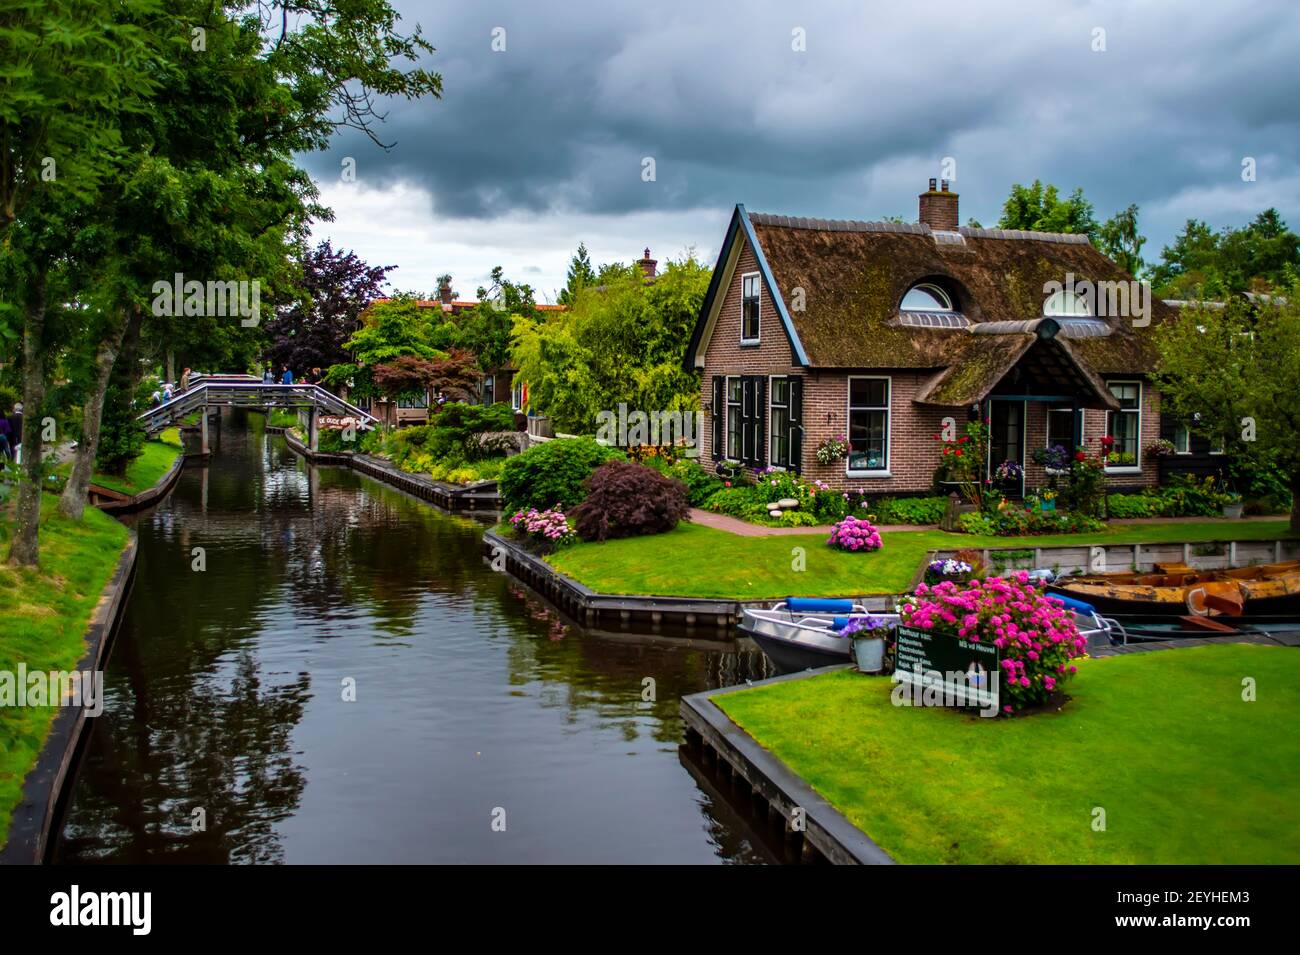 Giethoorn, Netherlands - July 6, 2019: Cute rural Dutch house, known as 'Dog House' for resemblance to a dog, in the famous village of Giethoorn Stock Photo